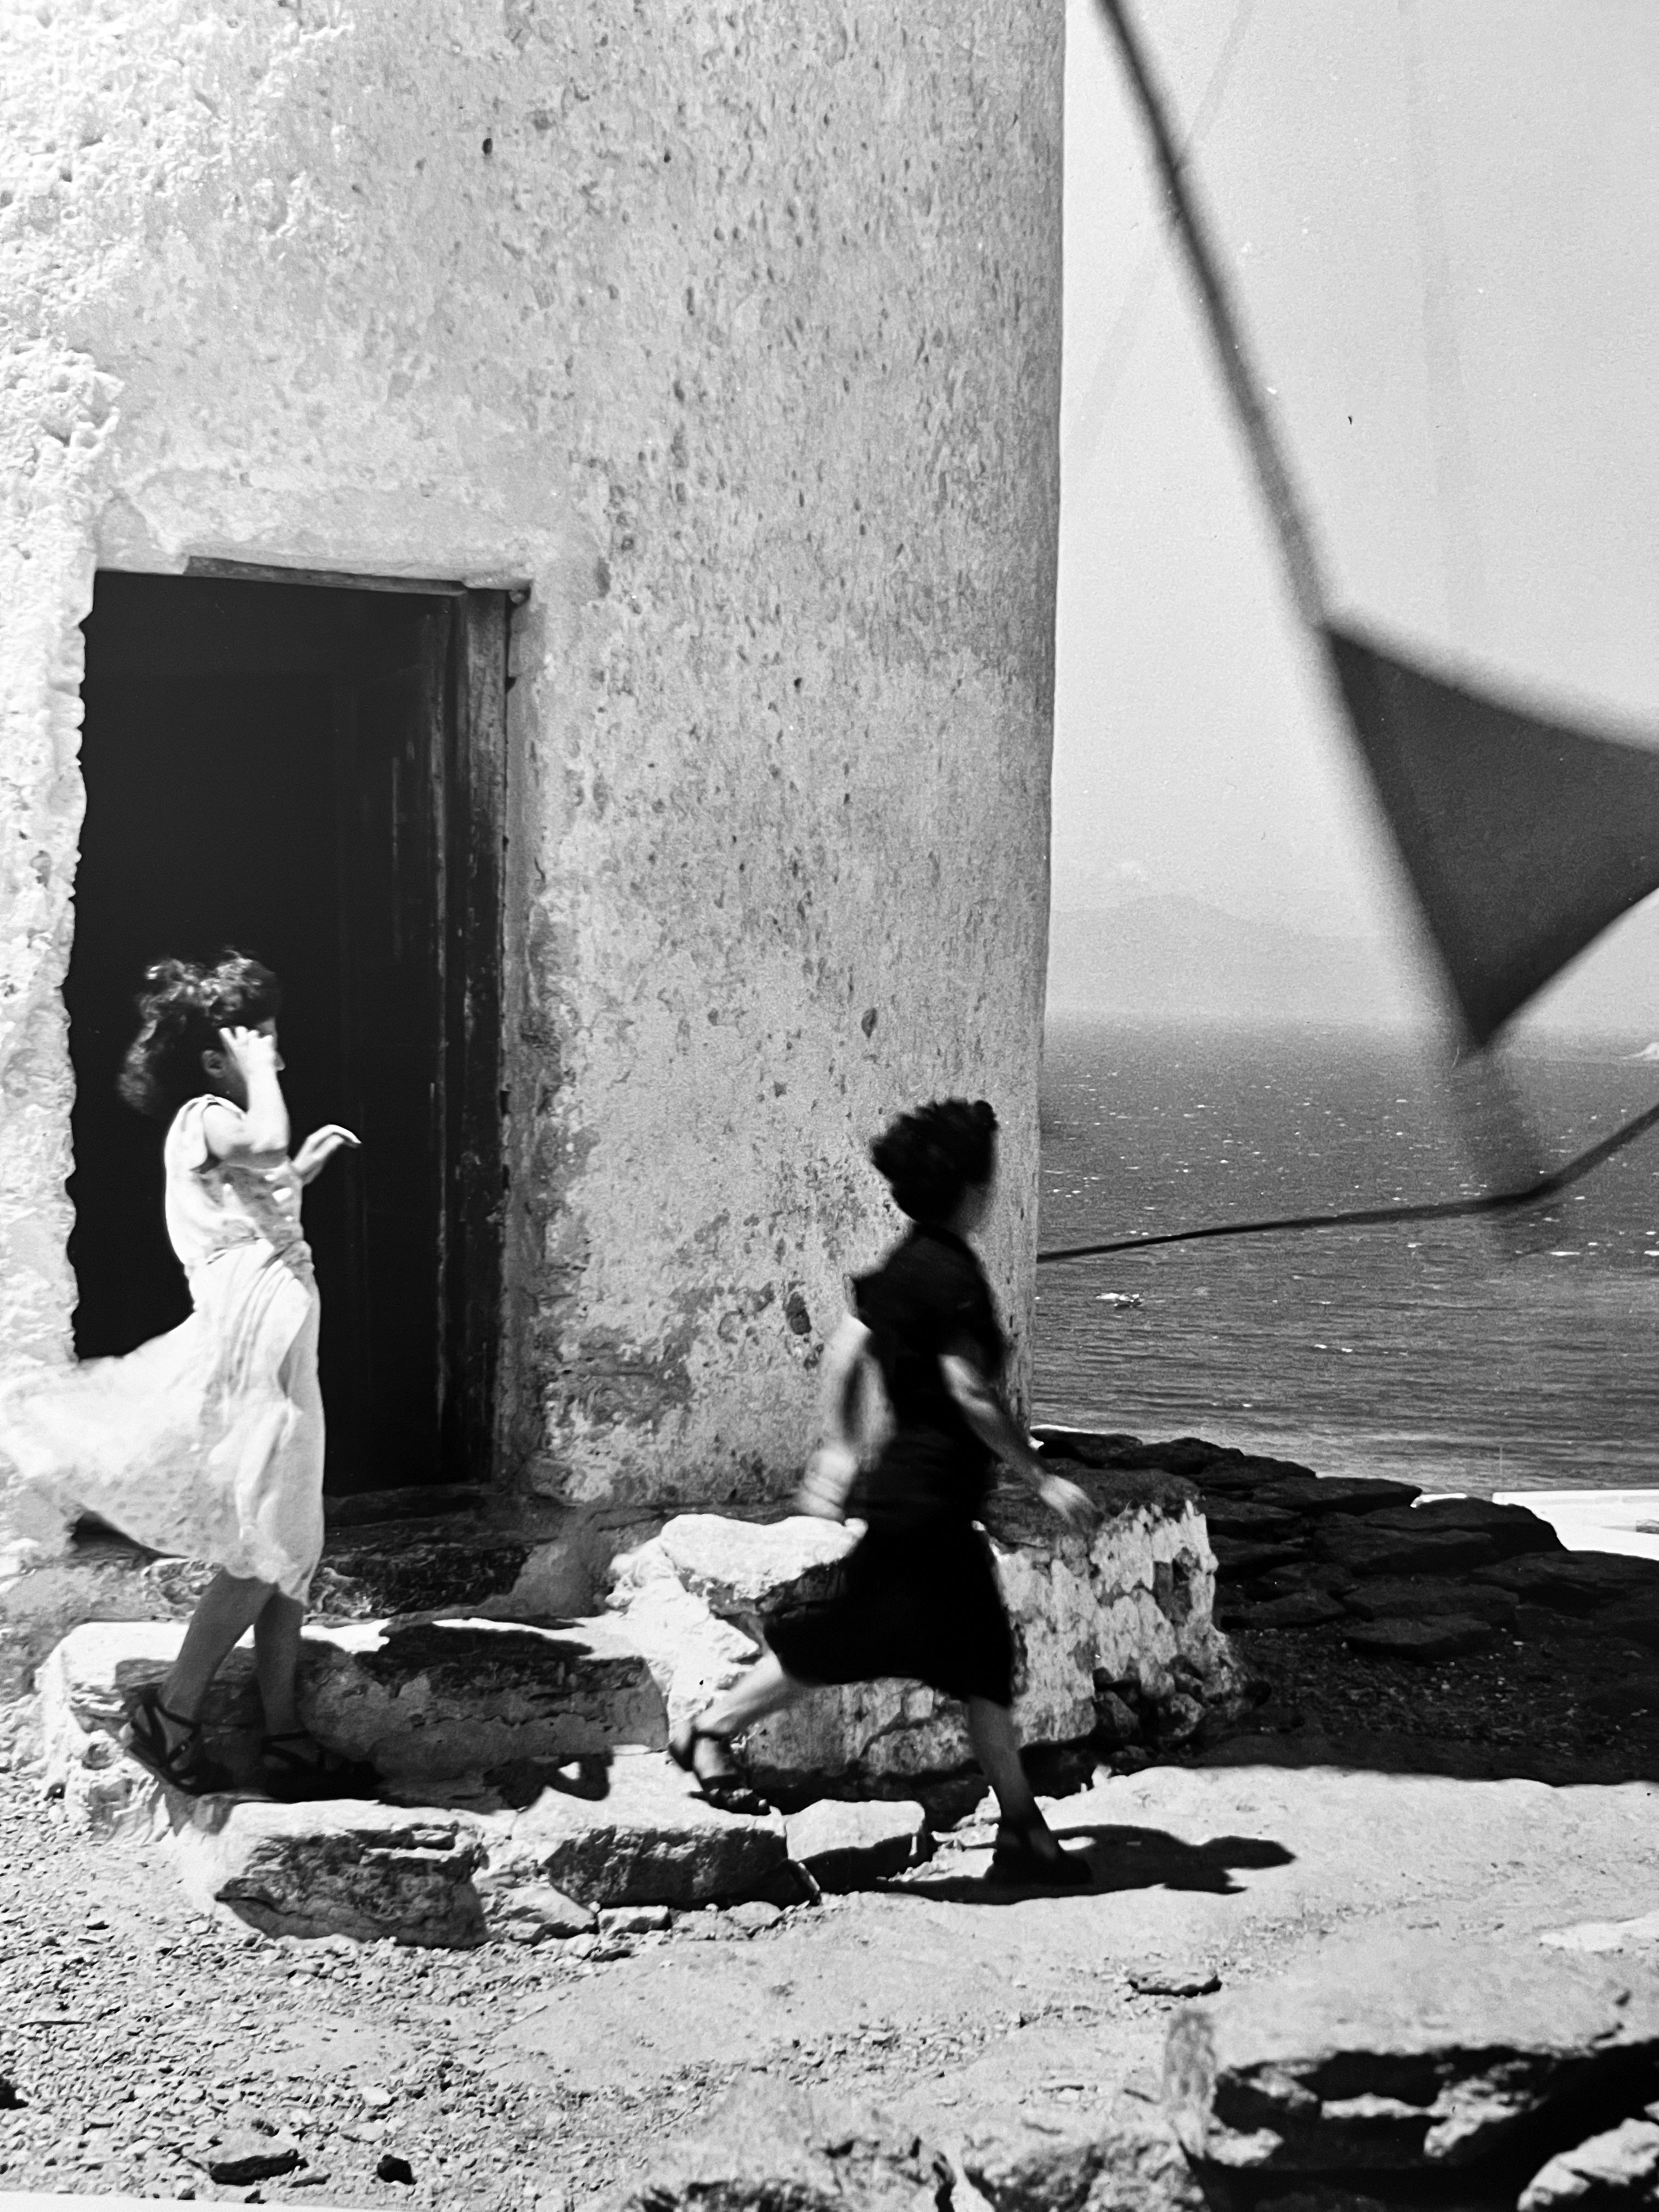 Windmill, Greece, Black and White Landscape Photography 1950s - Gray Black and White Photograph by Ernst Haas